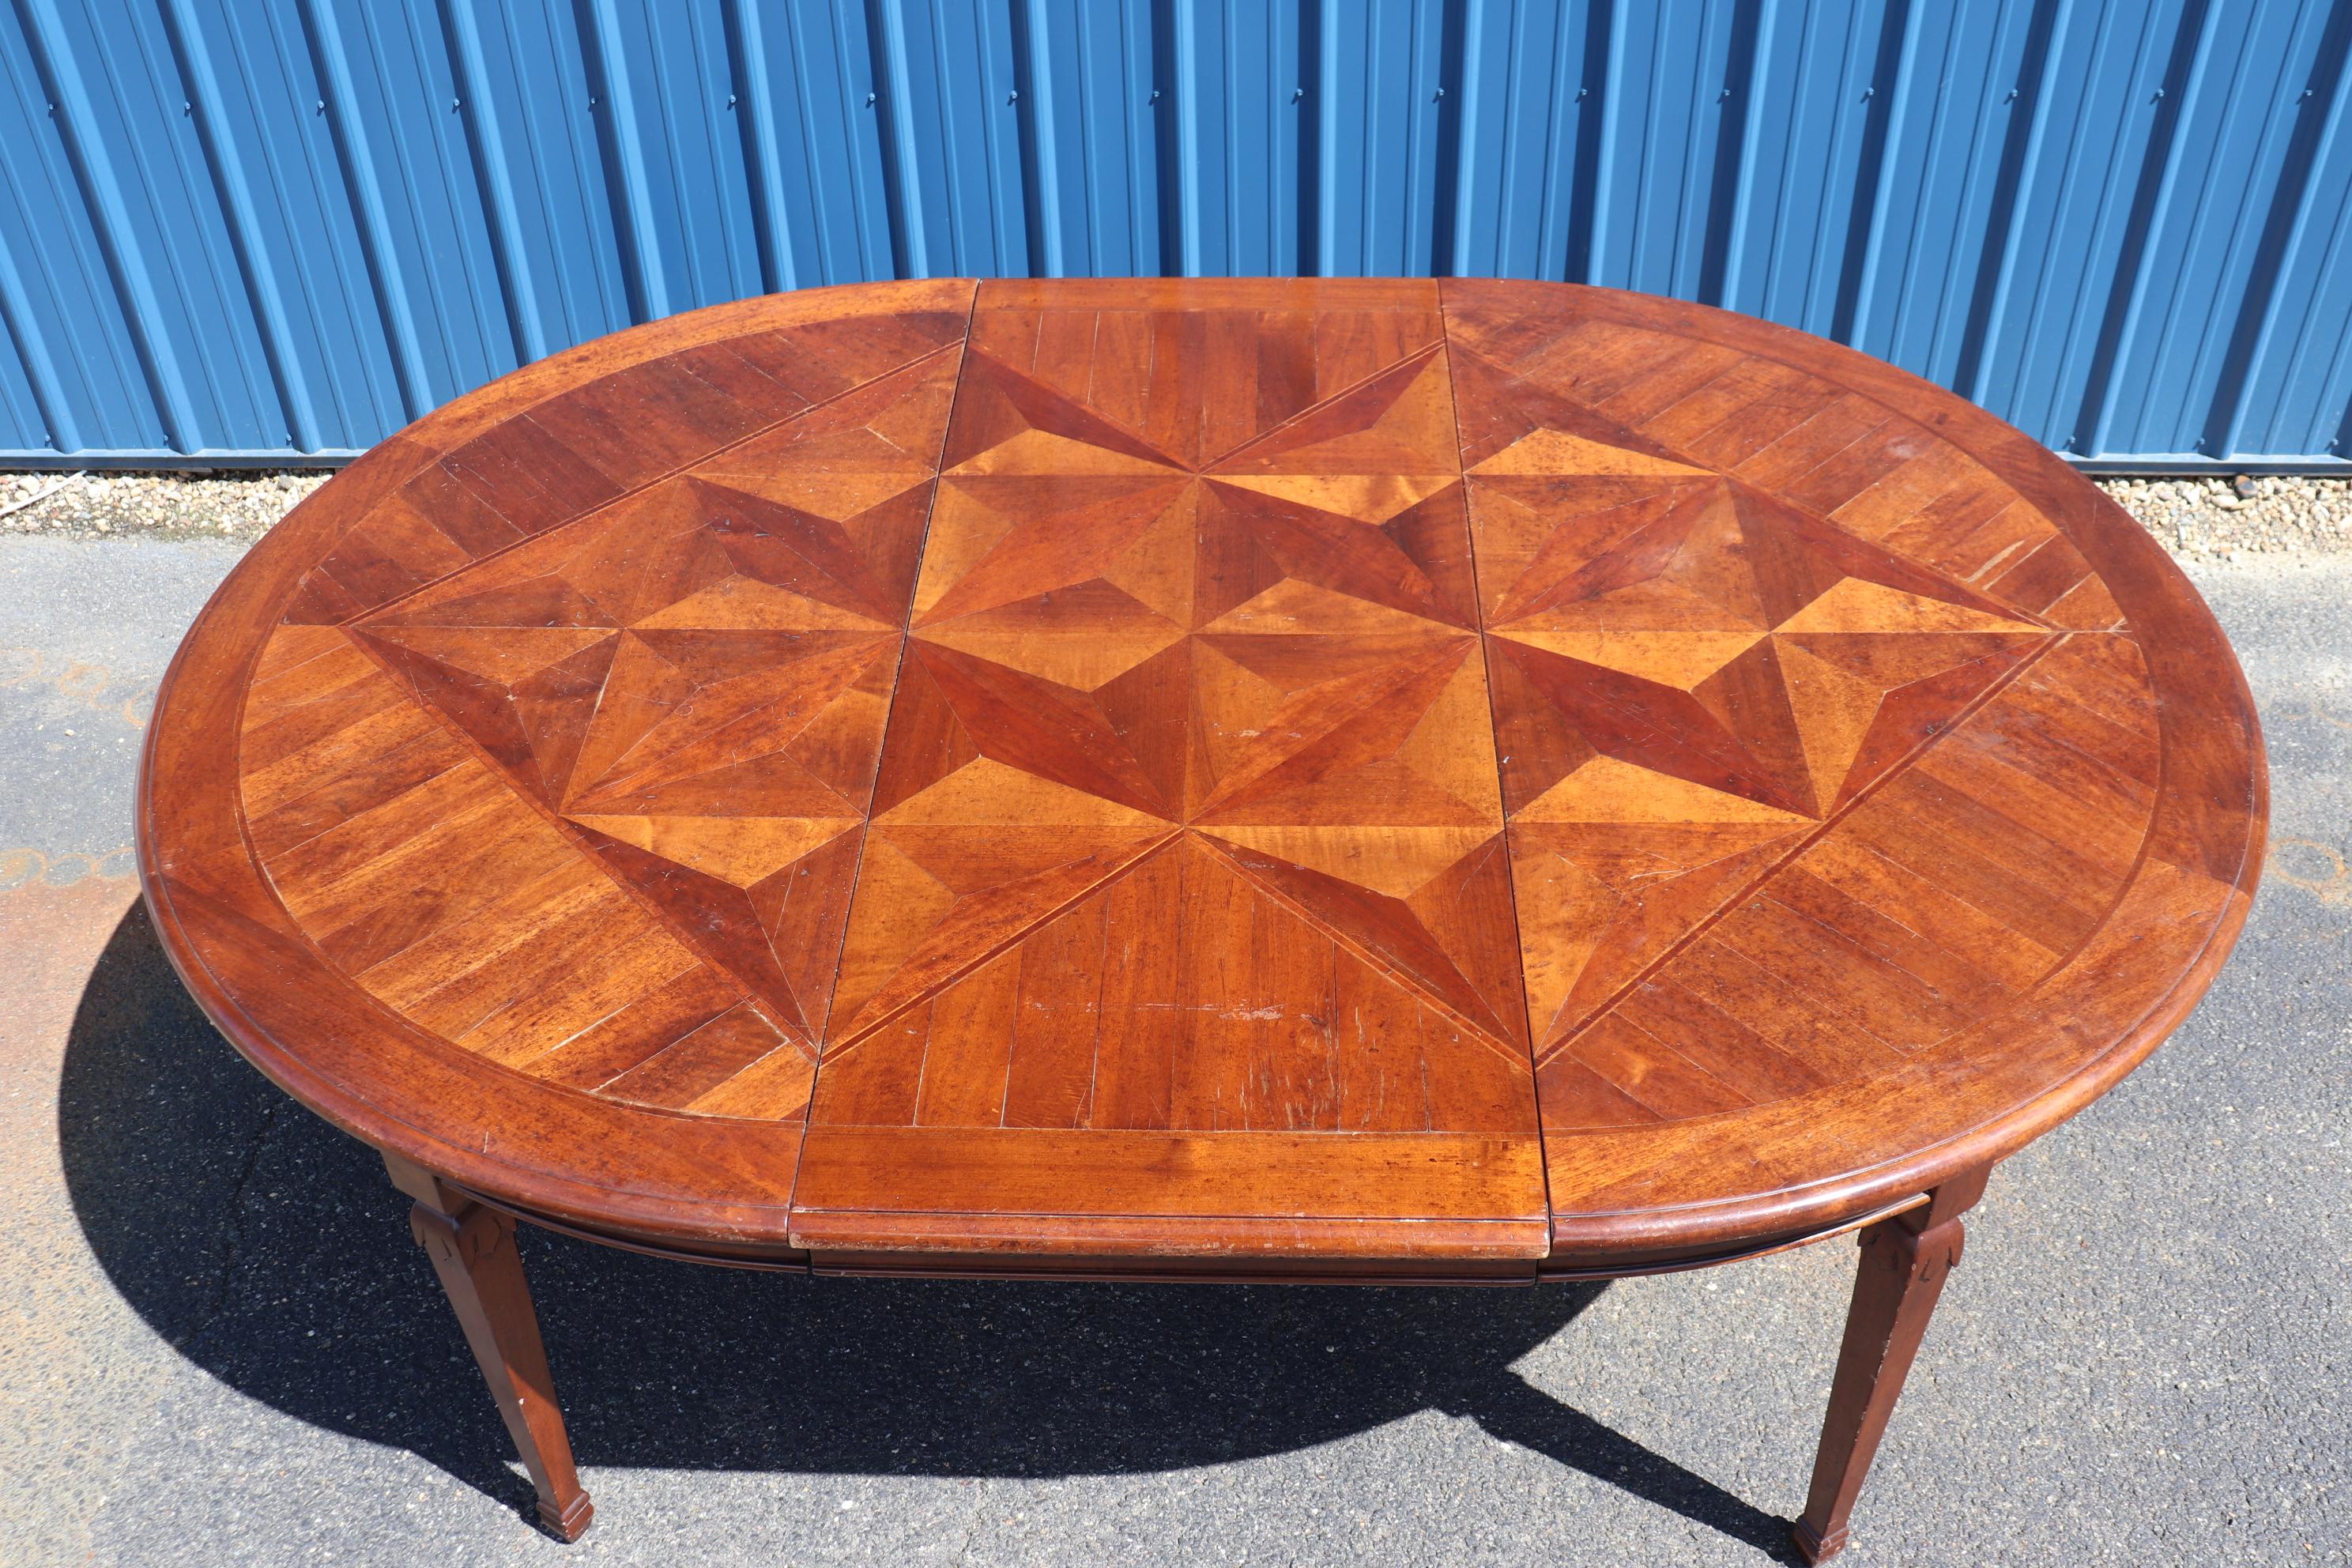 French Provincial Fine Quality Italian Provincial Paquetry Walnut Dining Table W Leaf For Sale